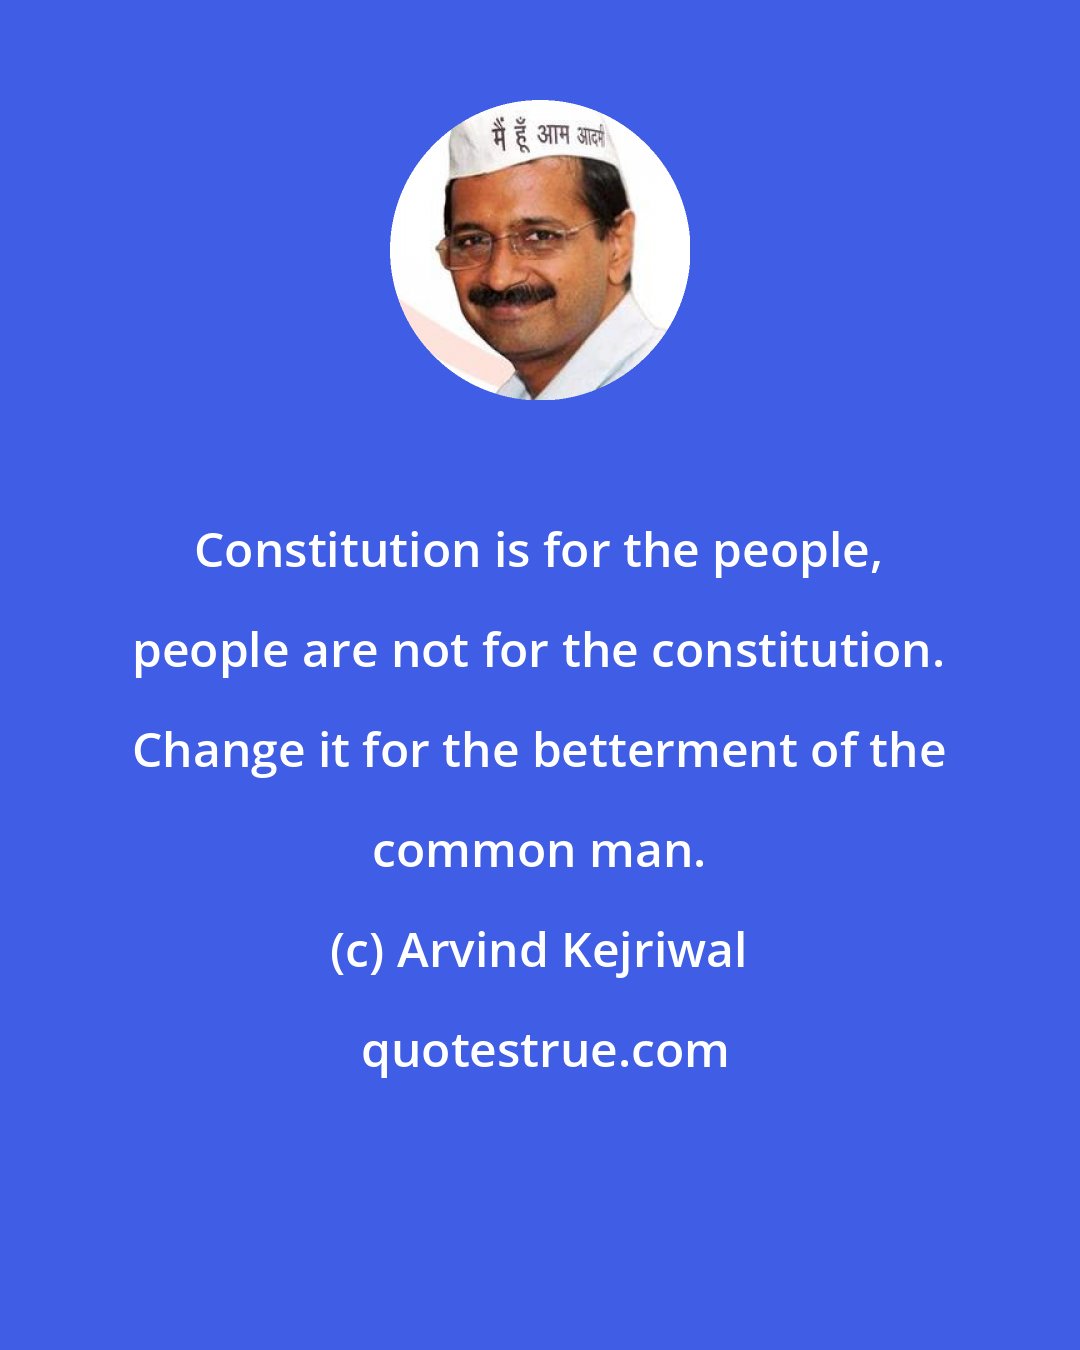 Arvind Kejriwal: Constitution is for the people, people are not for the constitution. Change it for the betterment of the common man.